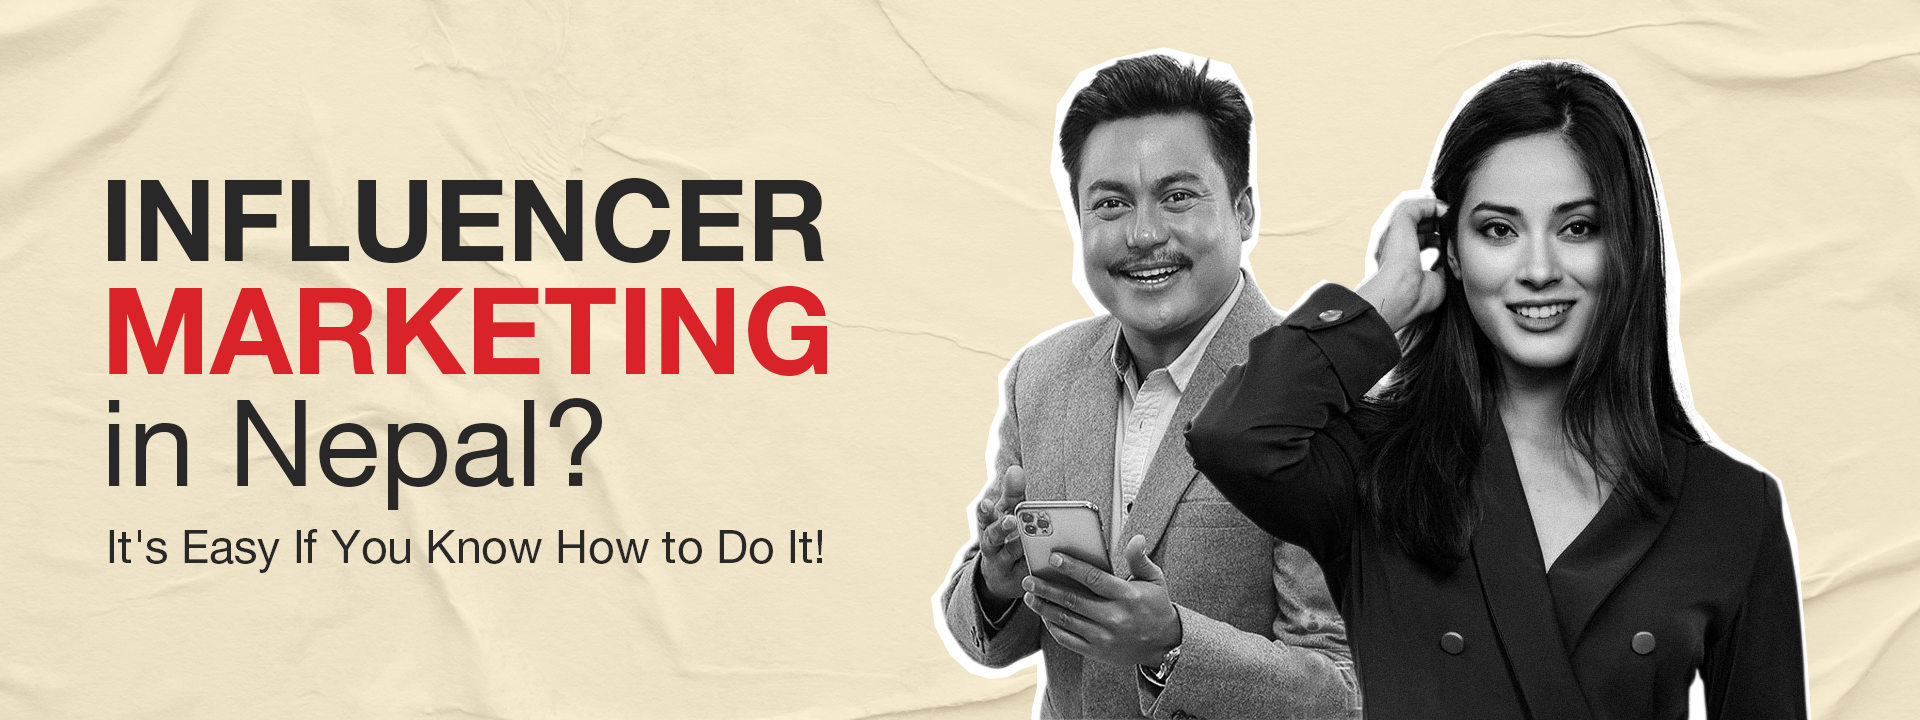 Influencer Marketing in Nepal? It’s Easy If You Know How to Do It!